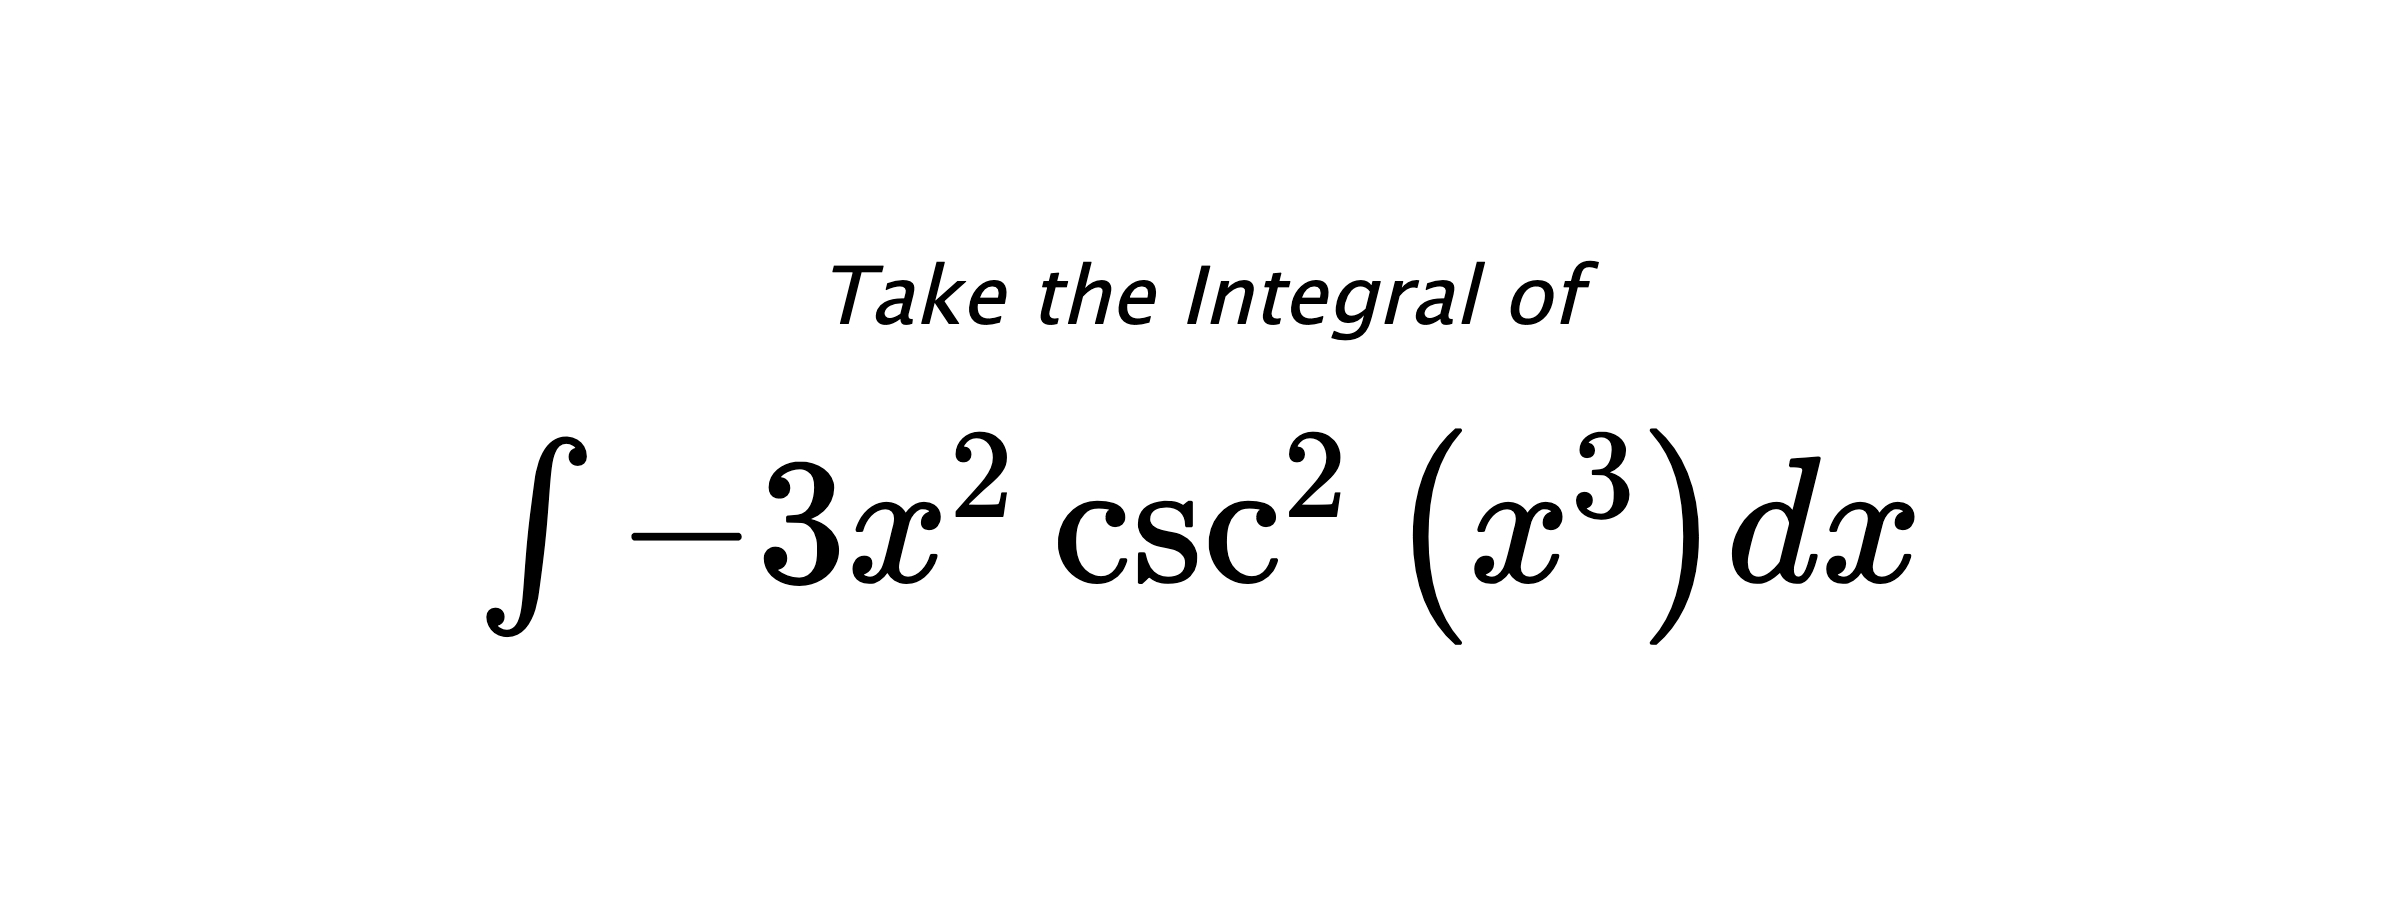 Take the Integral of $ \int - 3 x^{2} \csc^{2}{\left(x^{3} \right)} dx $